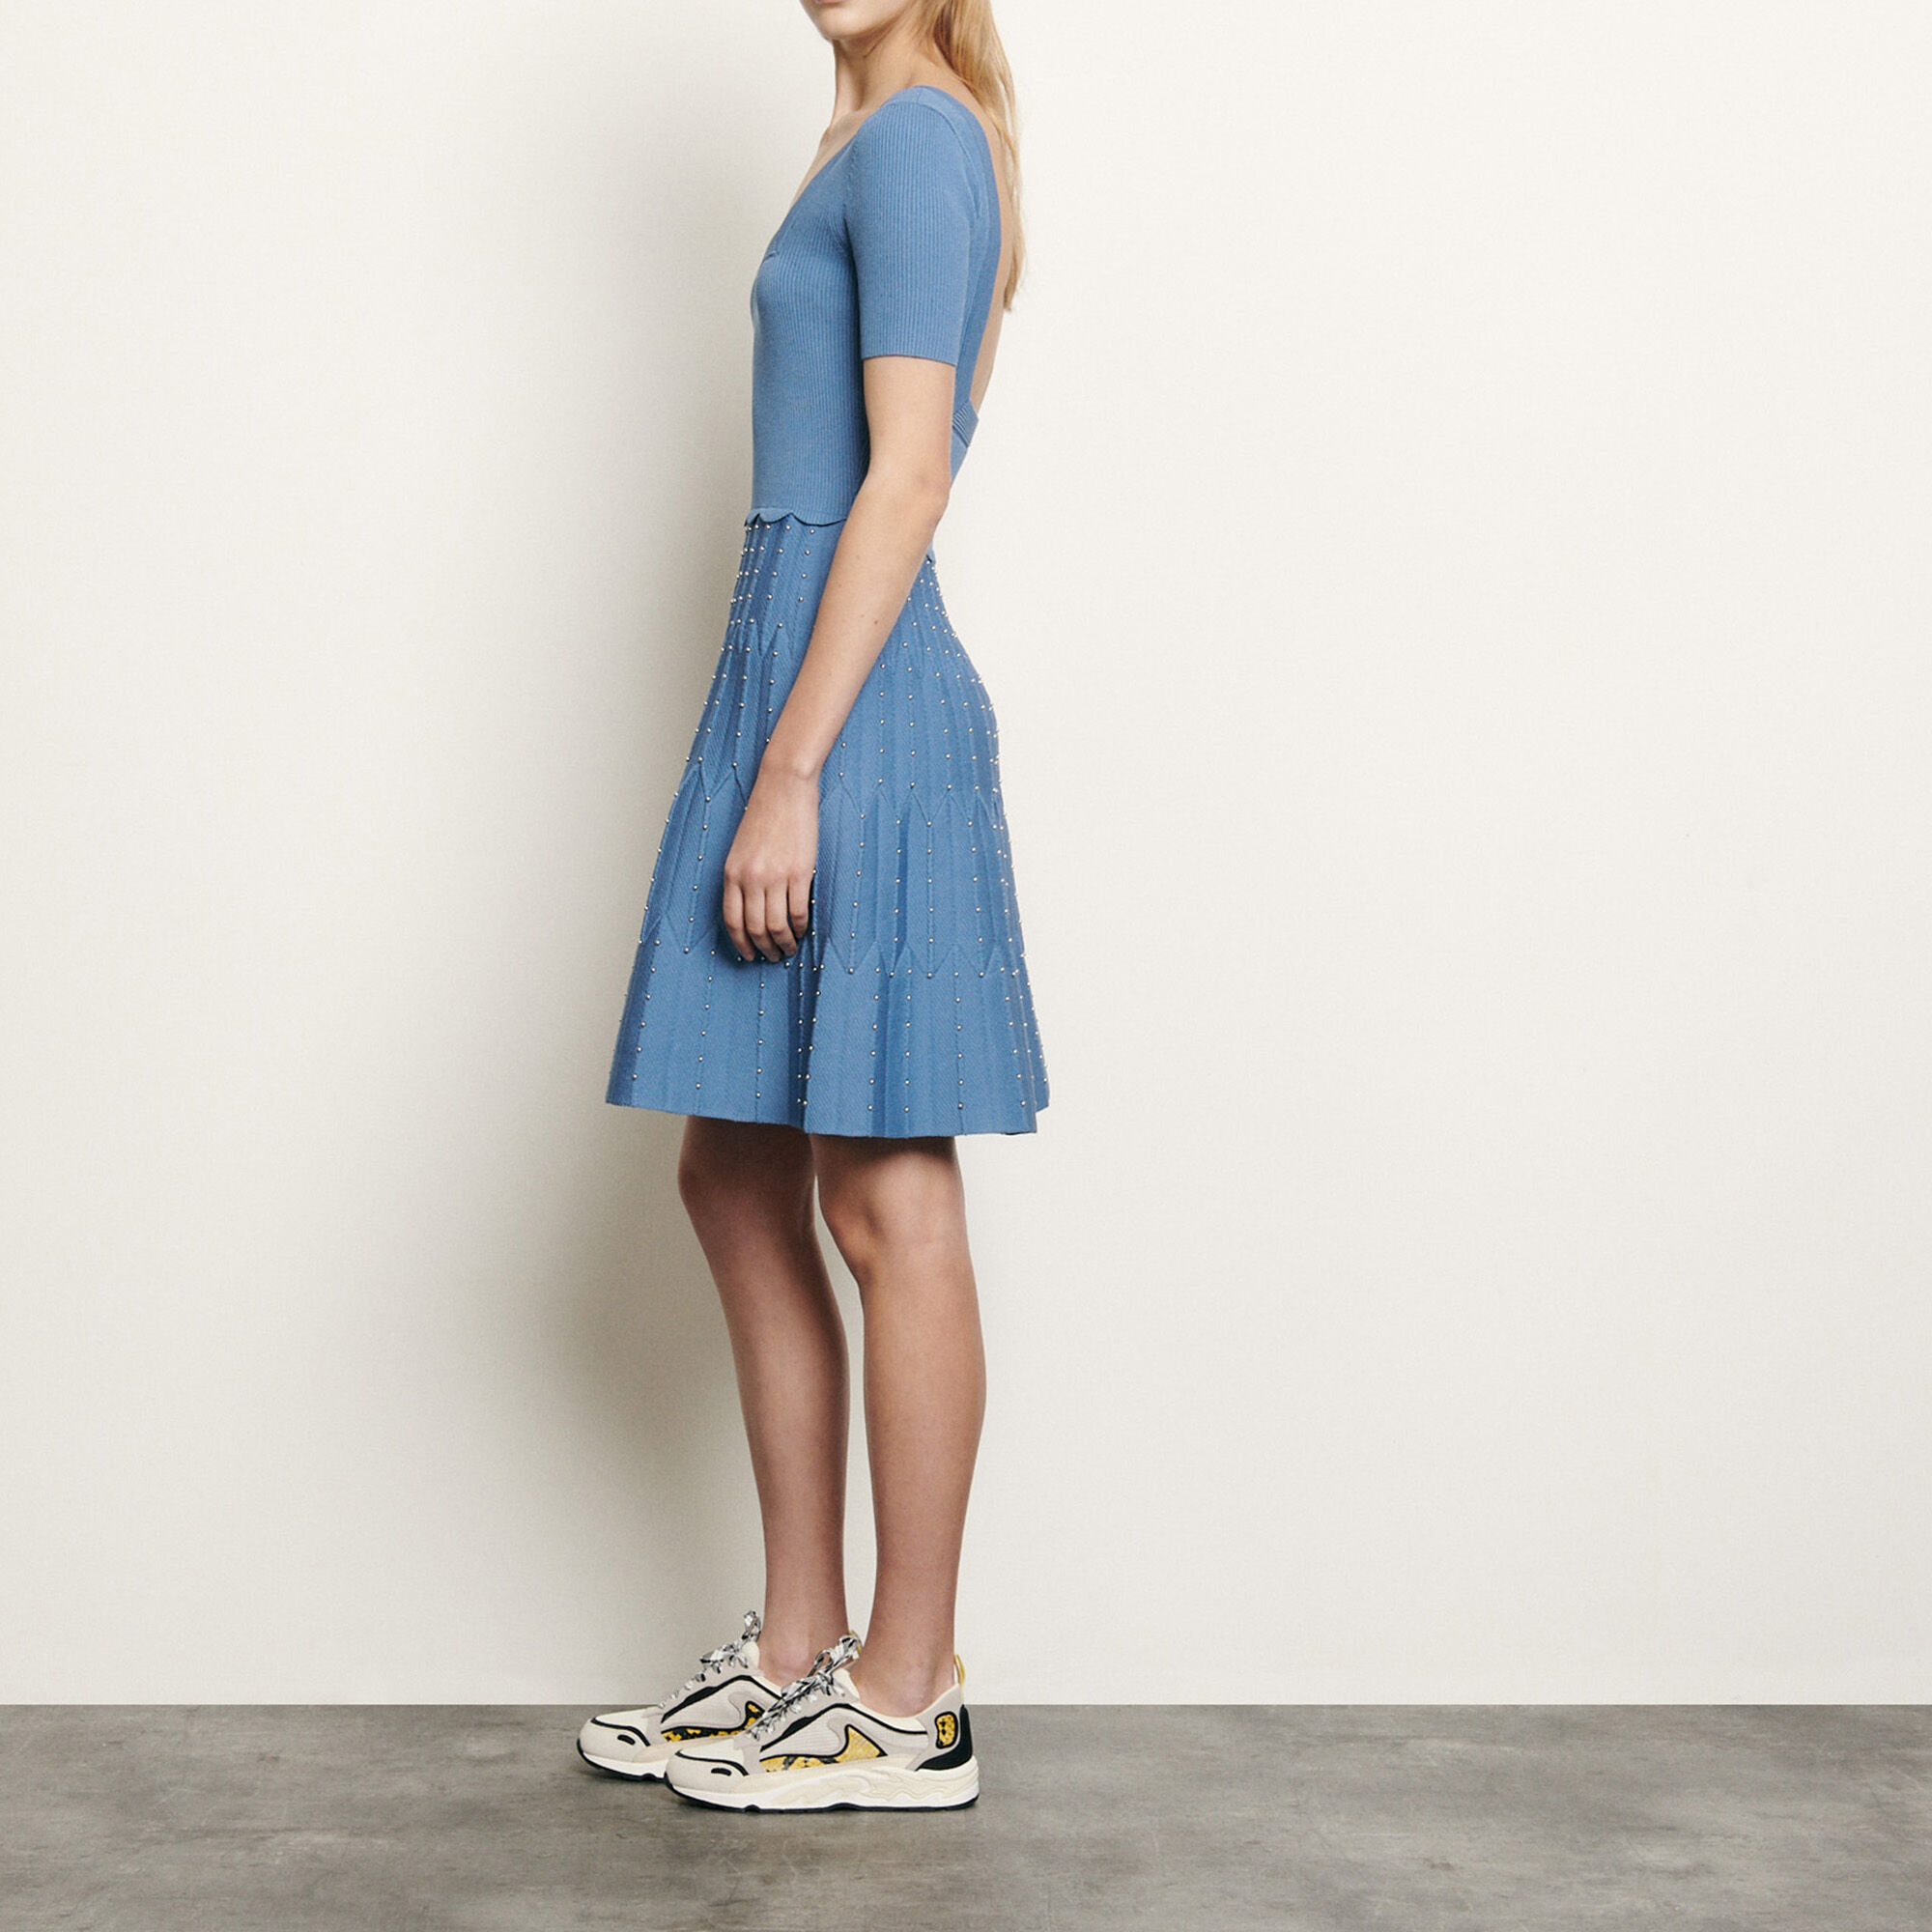 Knit dress with square neckline | Sandro | Sandro Secondhand